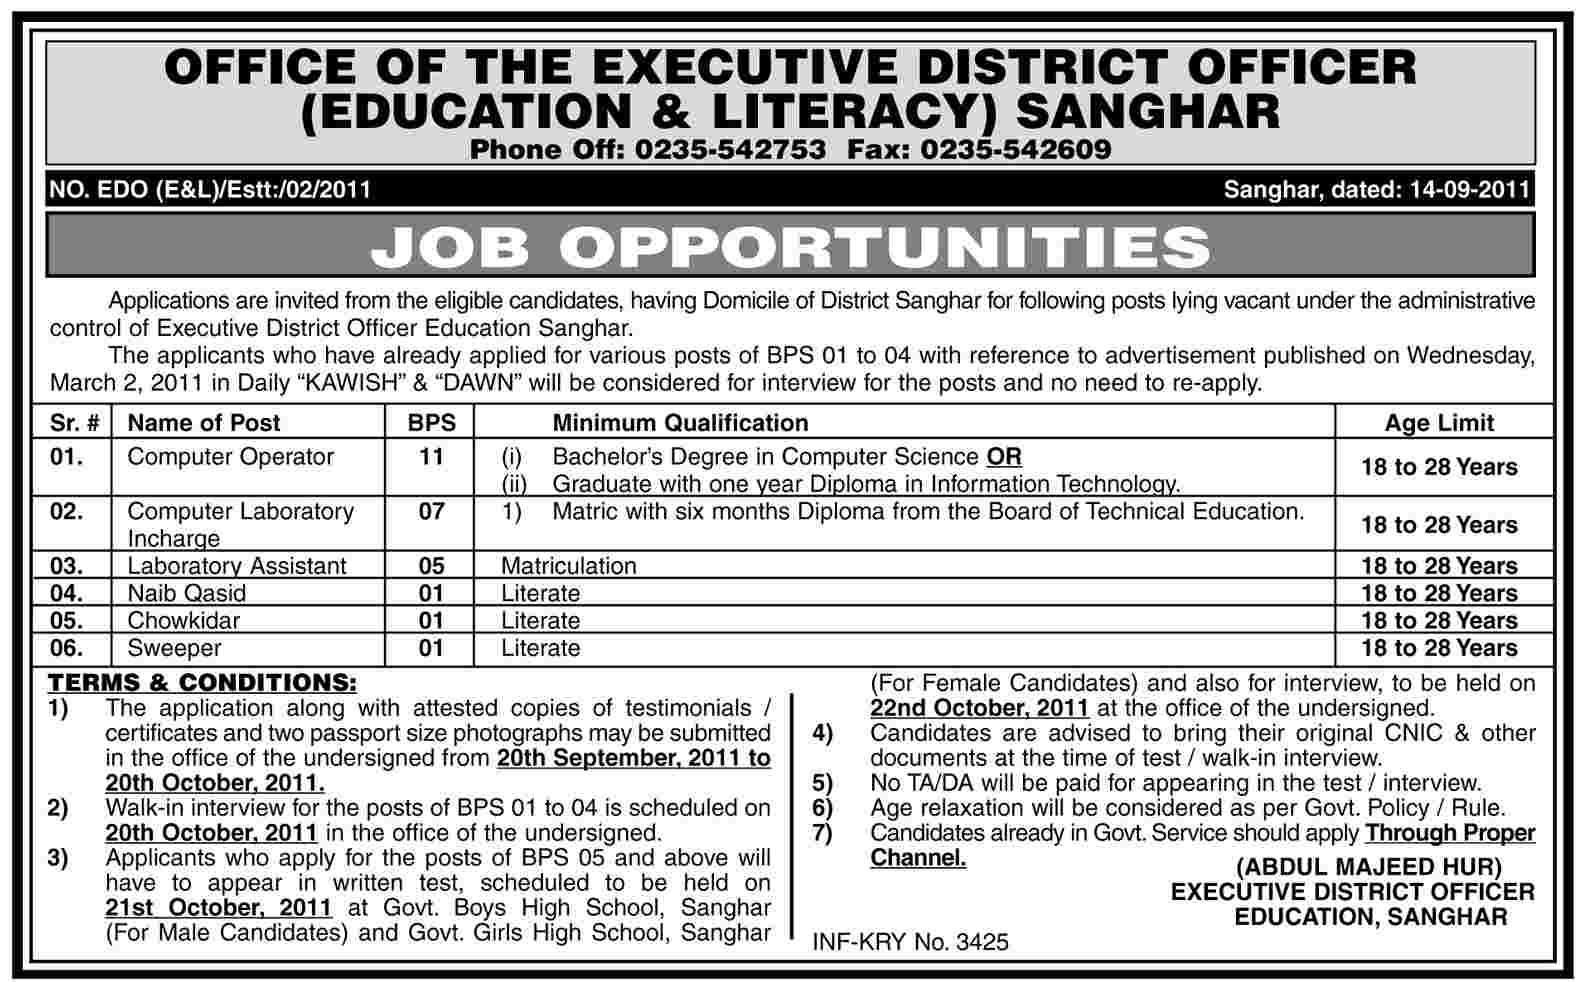 Office of the Executive District Officer, Sanghar Jobs Opportunities